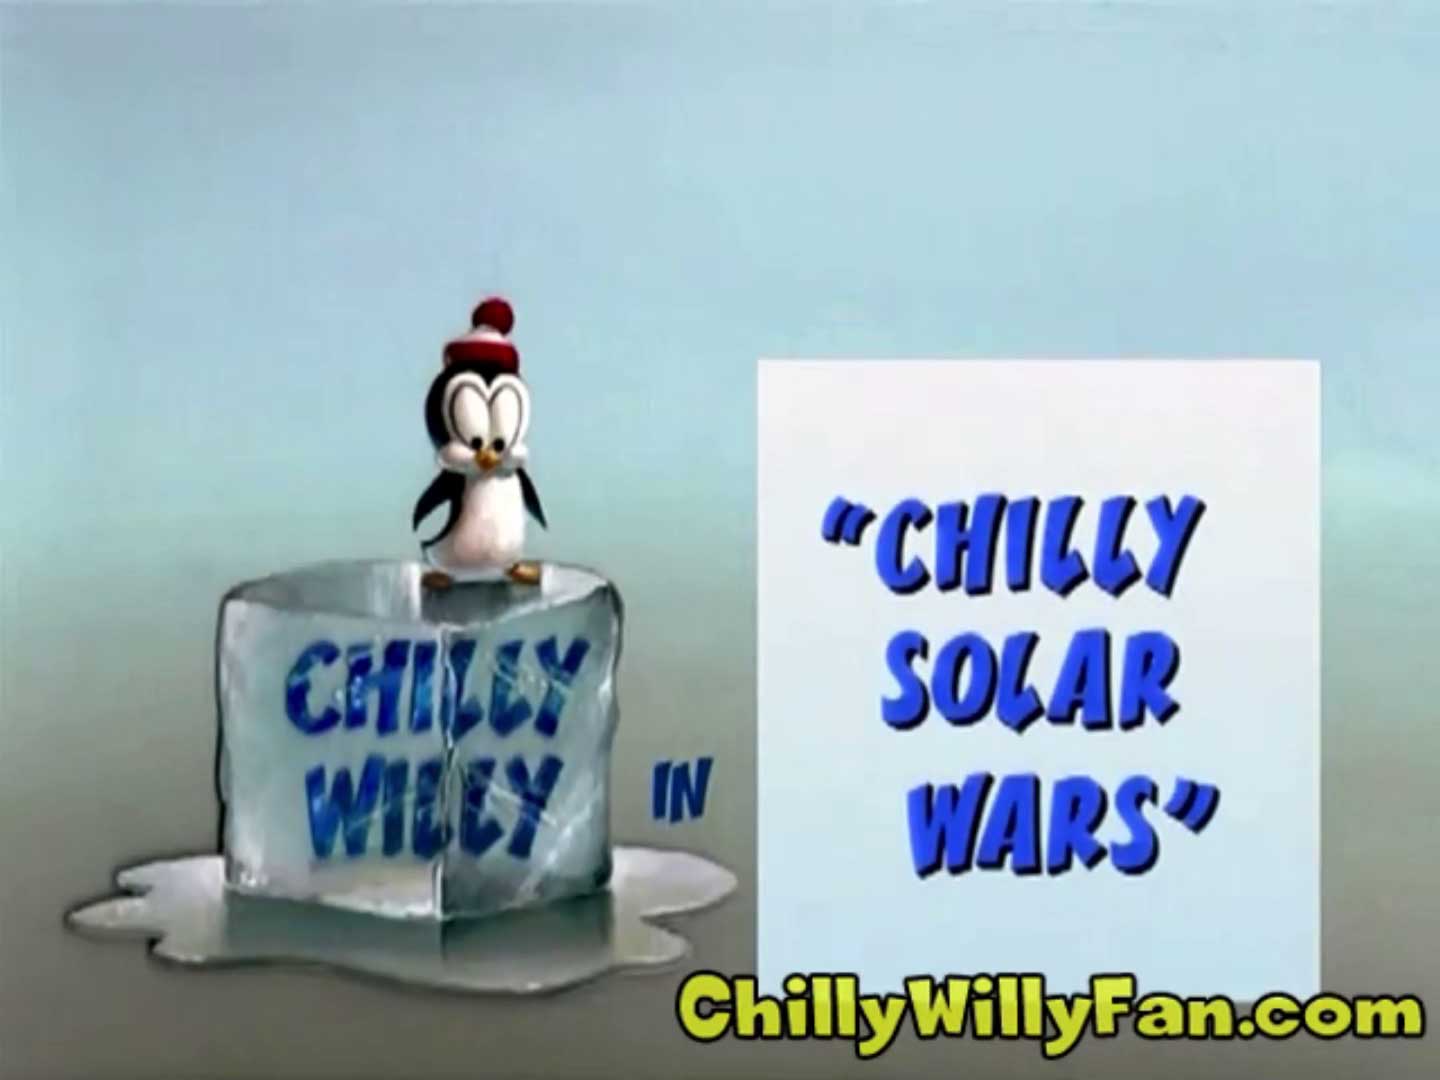 Chilly Willy - Chilly Solar Wars